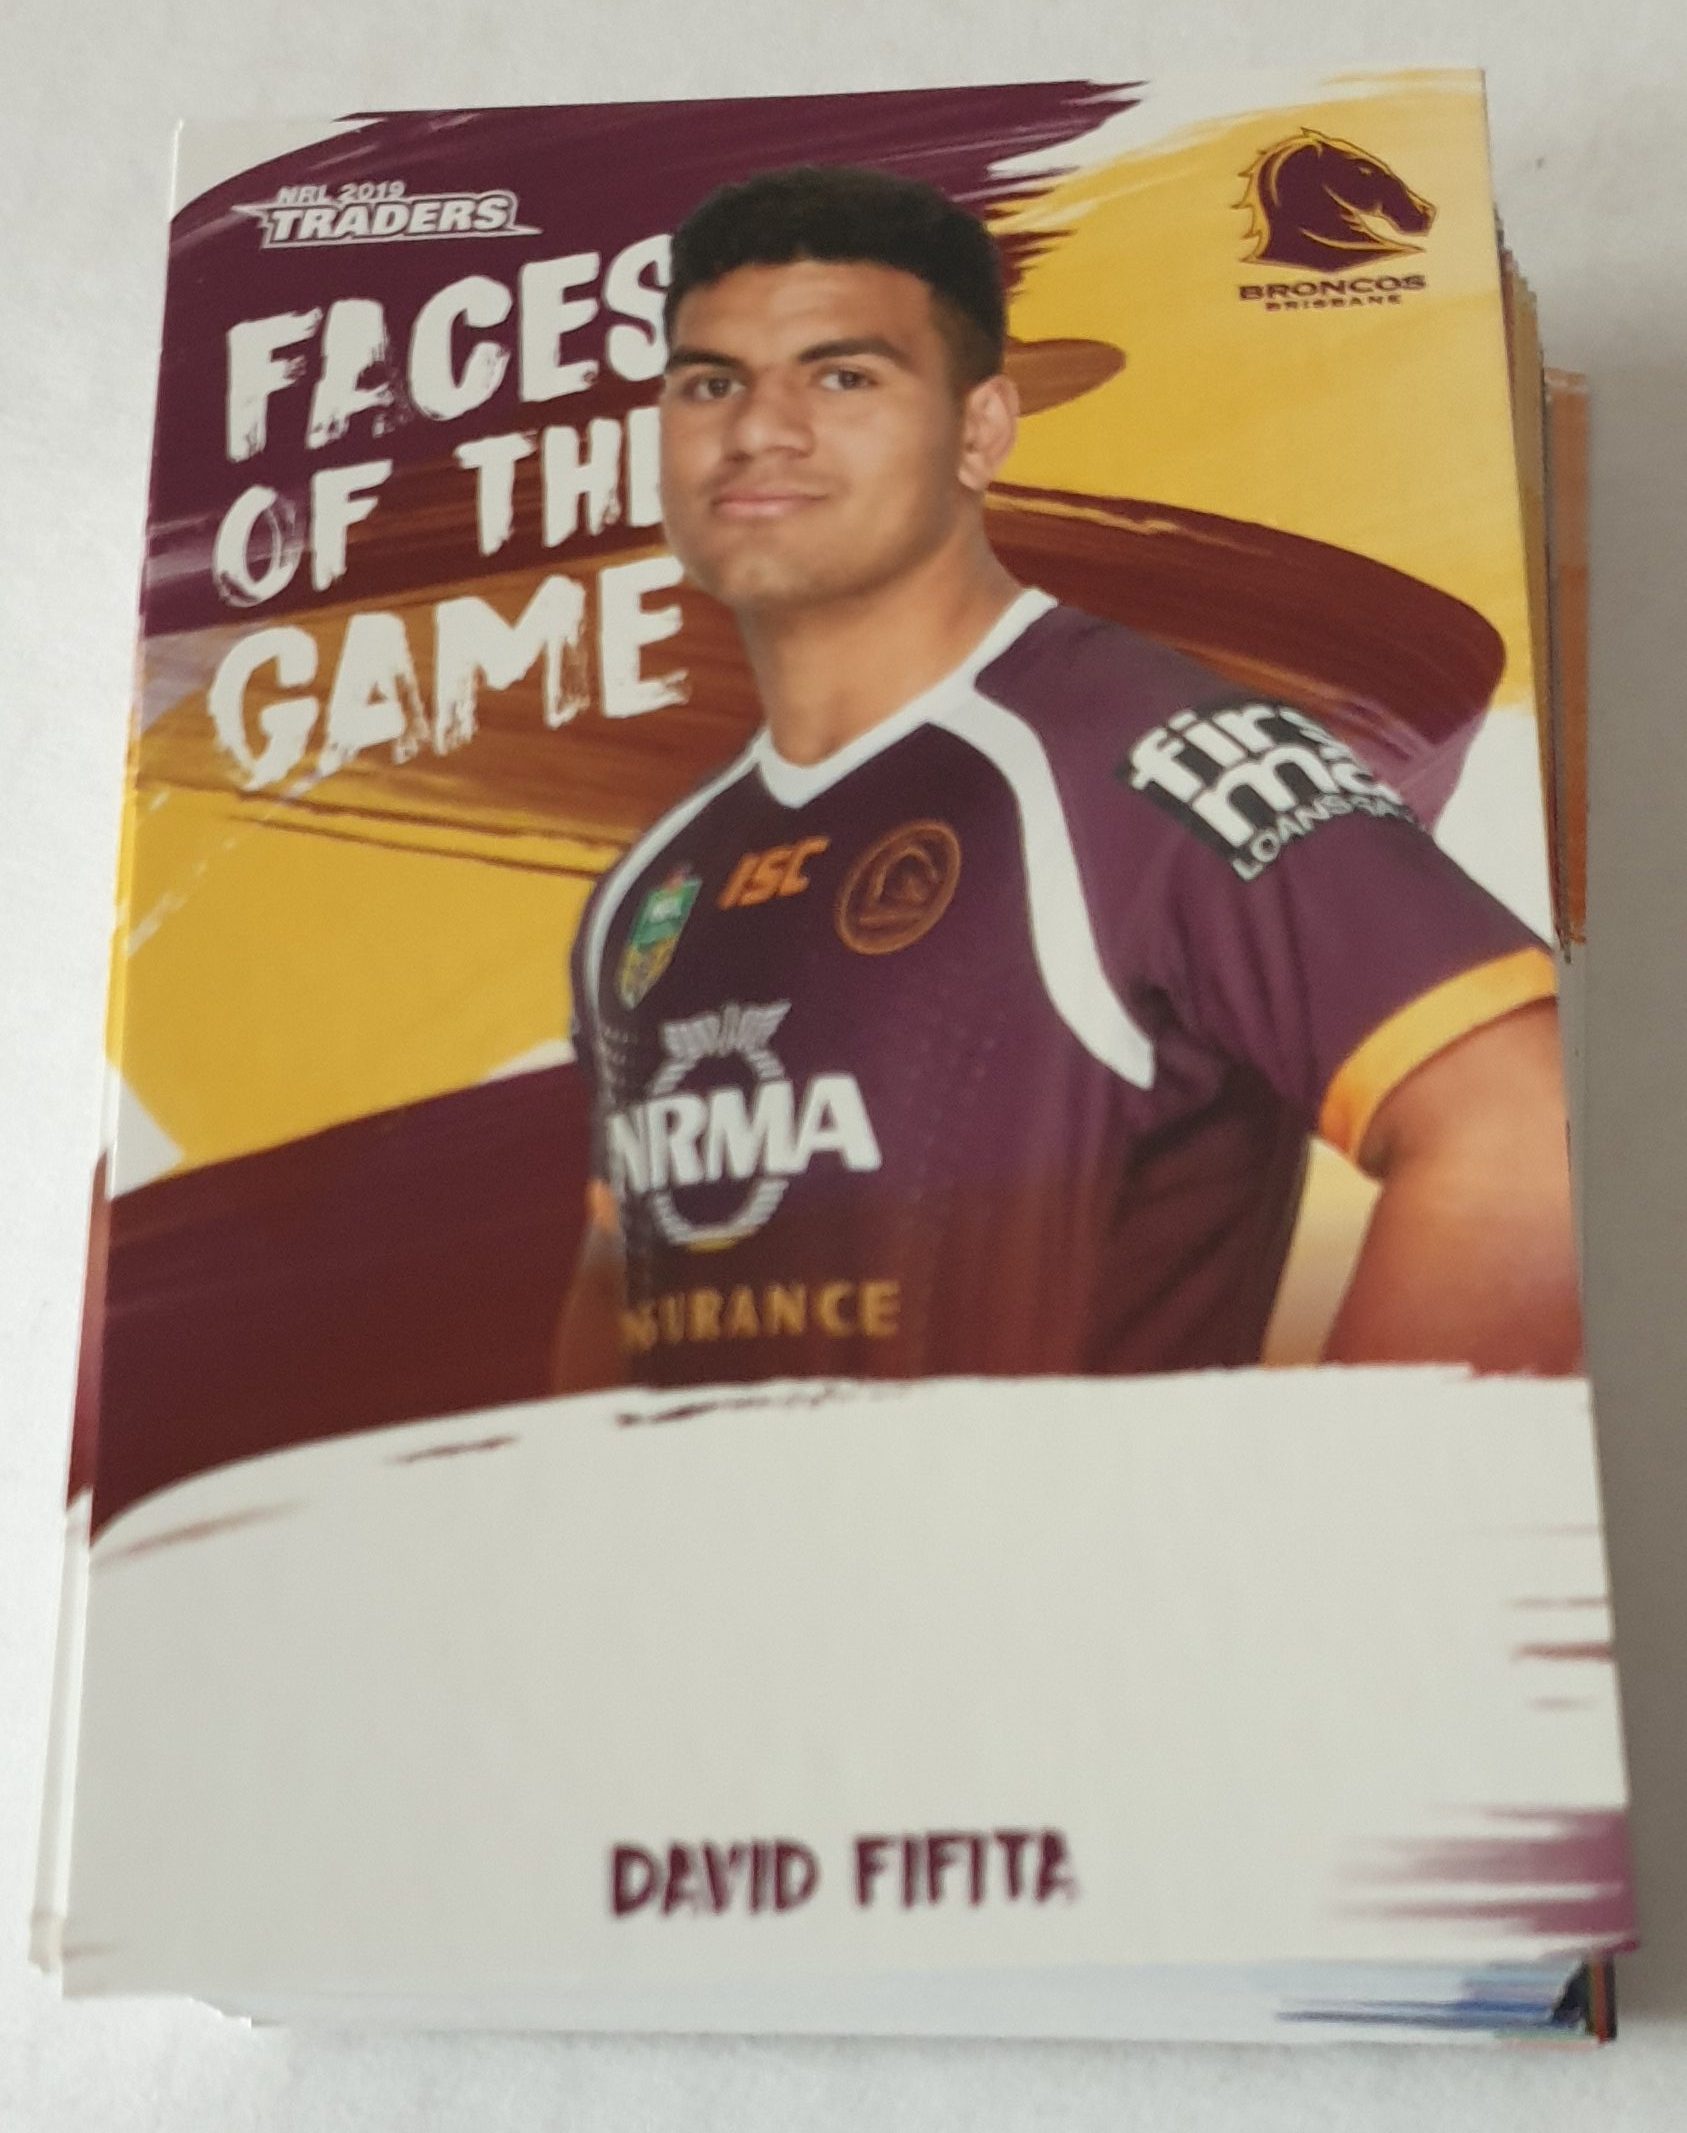 2019 Traders Faces Of The Game Full Set (64 Cards)